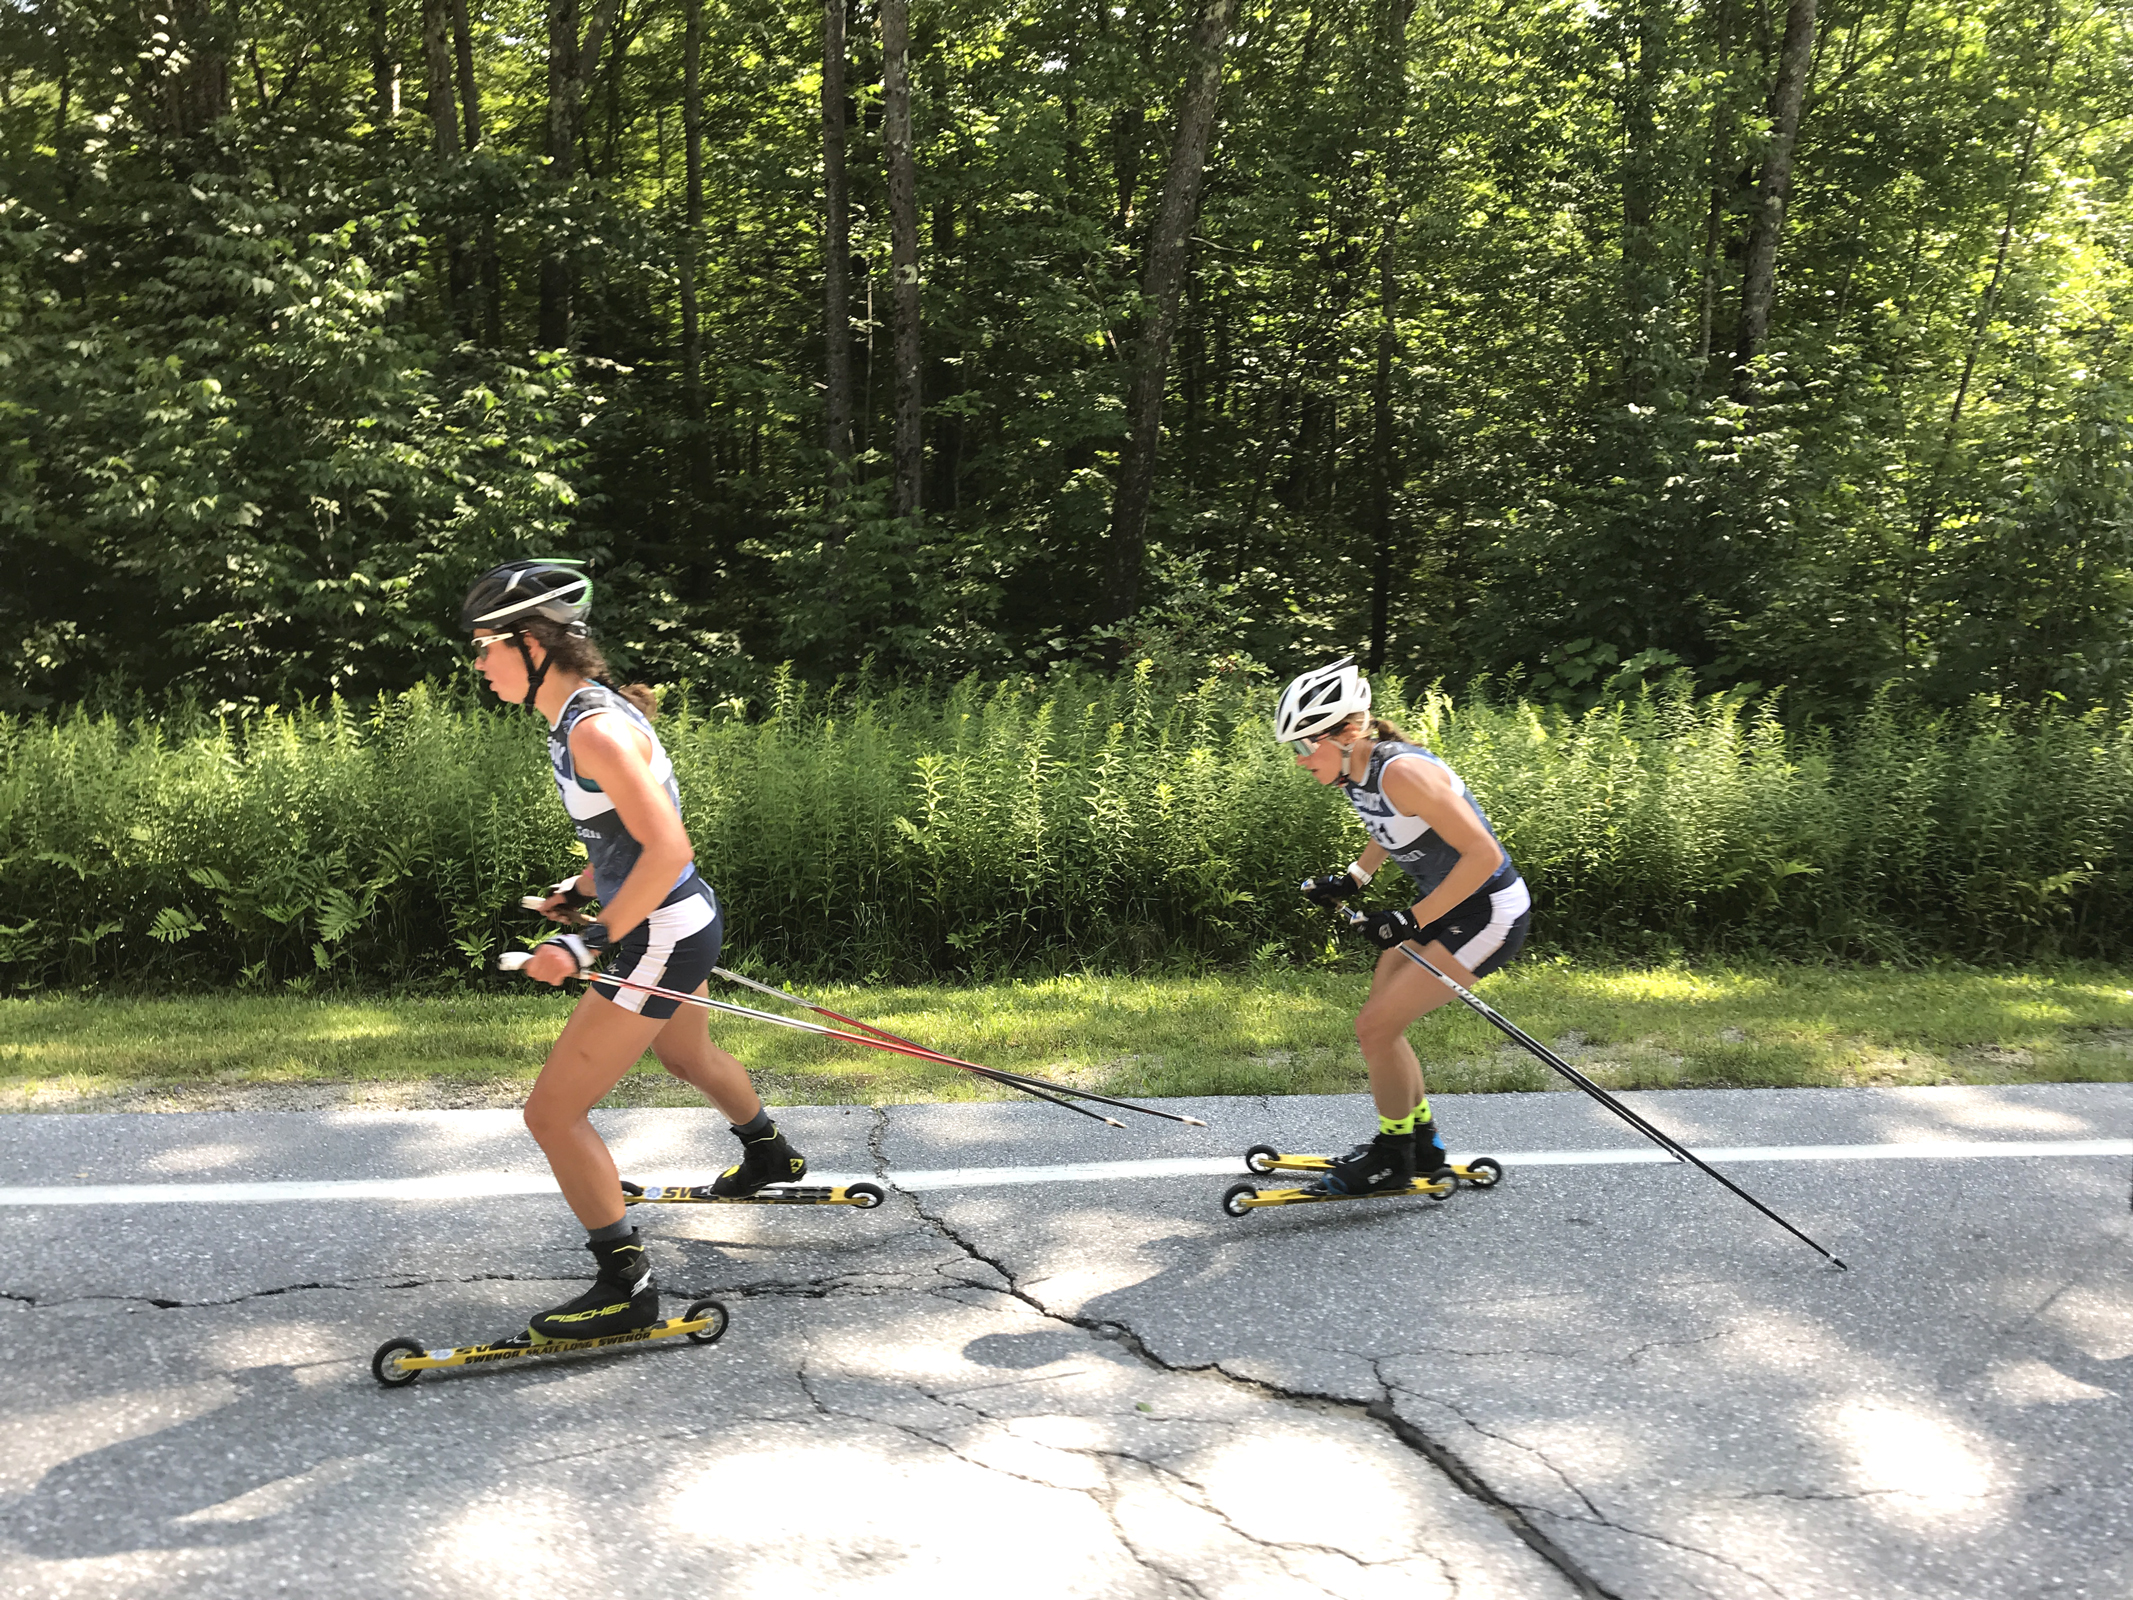 Caitlin Patterson leads Sophie Caldwell at App Gap Challenge